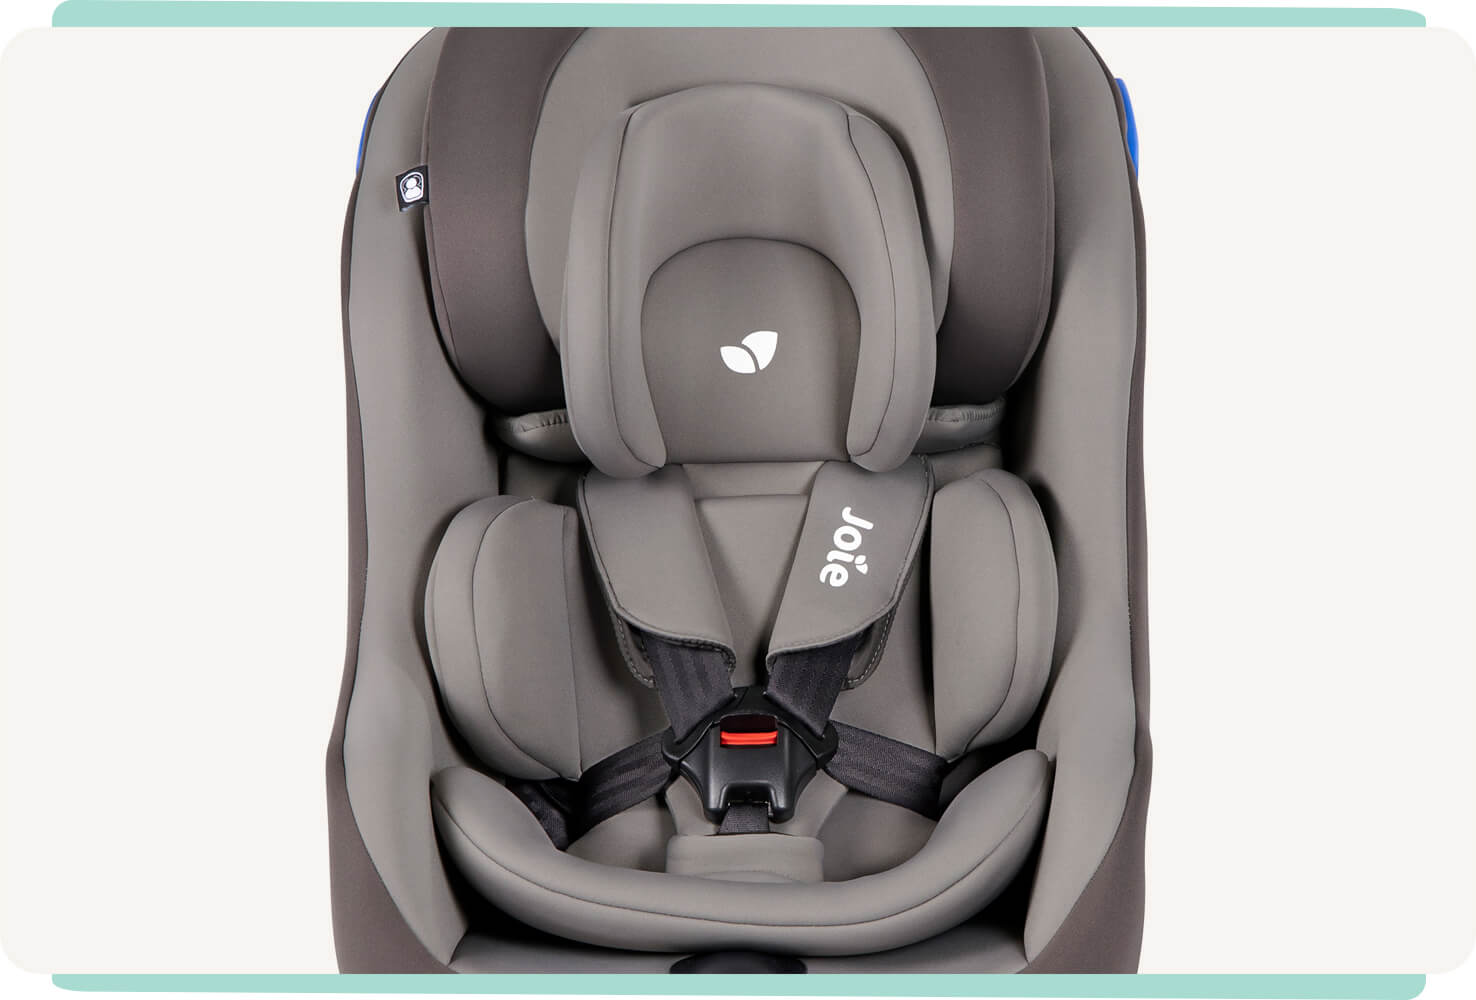 Joie Steadi car seat with harness clipped in with a tan two tone colour, and facing forward with infant insert. 